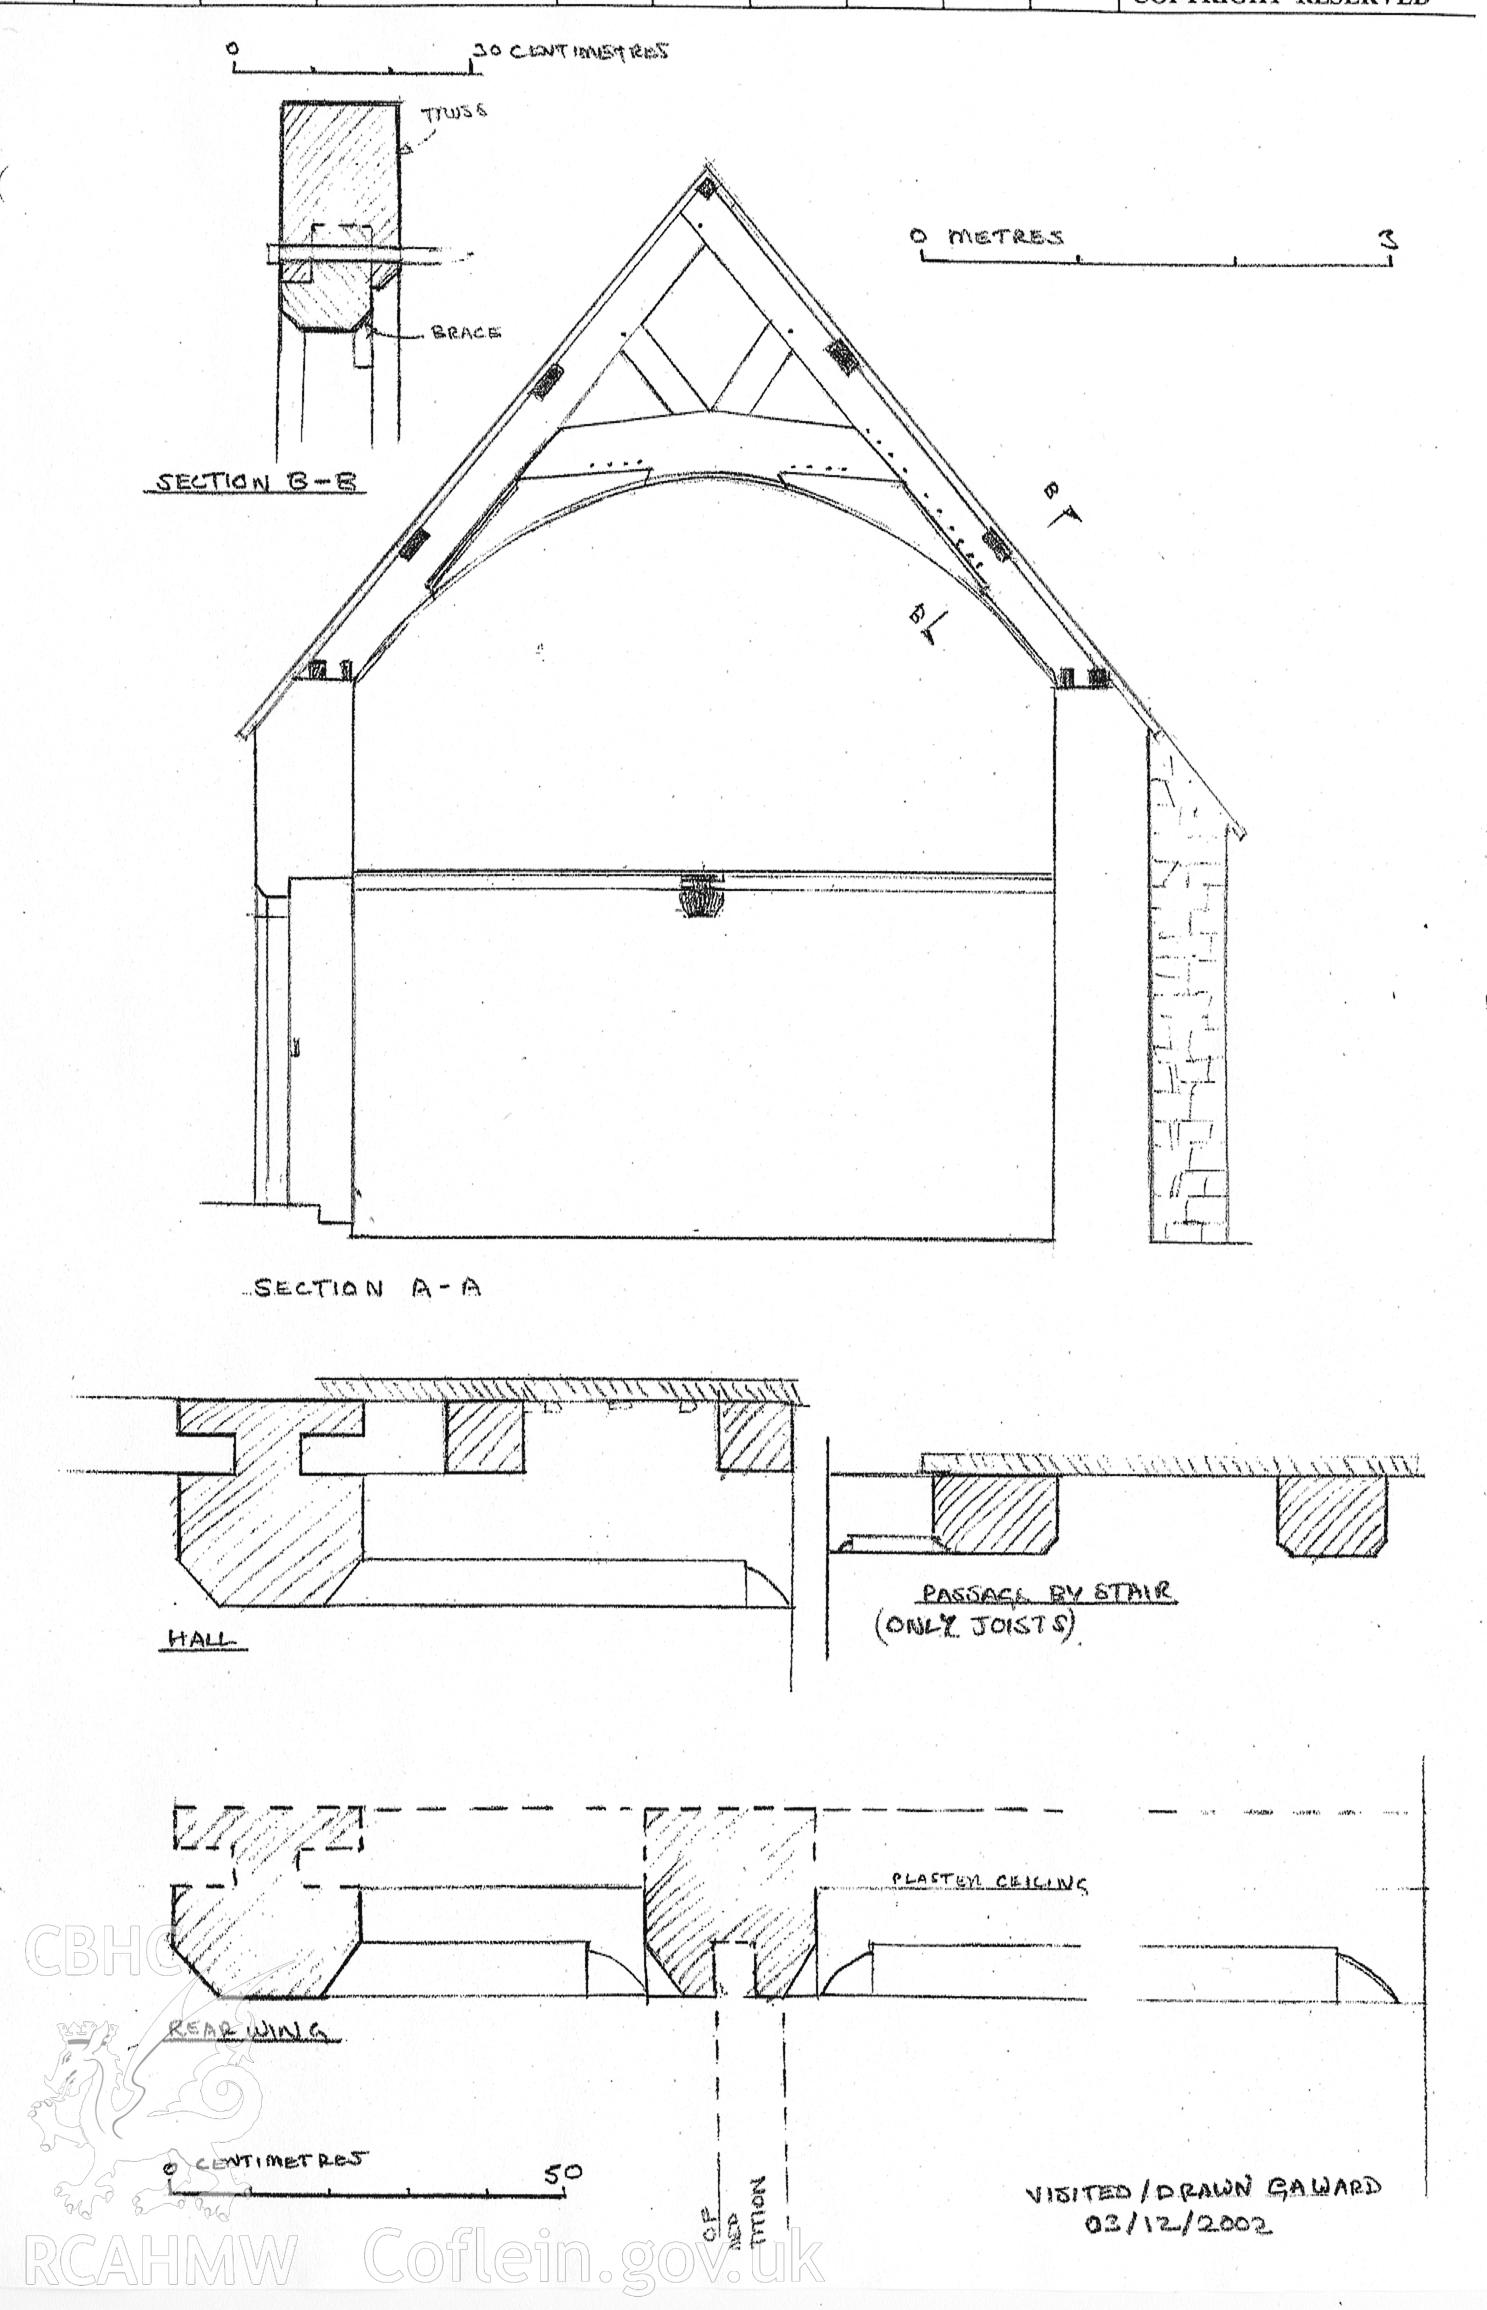 18 Vale Street, Denbigh; measured drawings featuring section view and timber detail produced by Geoff Ward, December 2002.